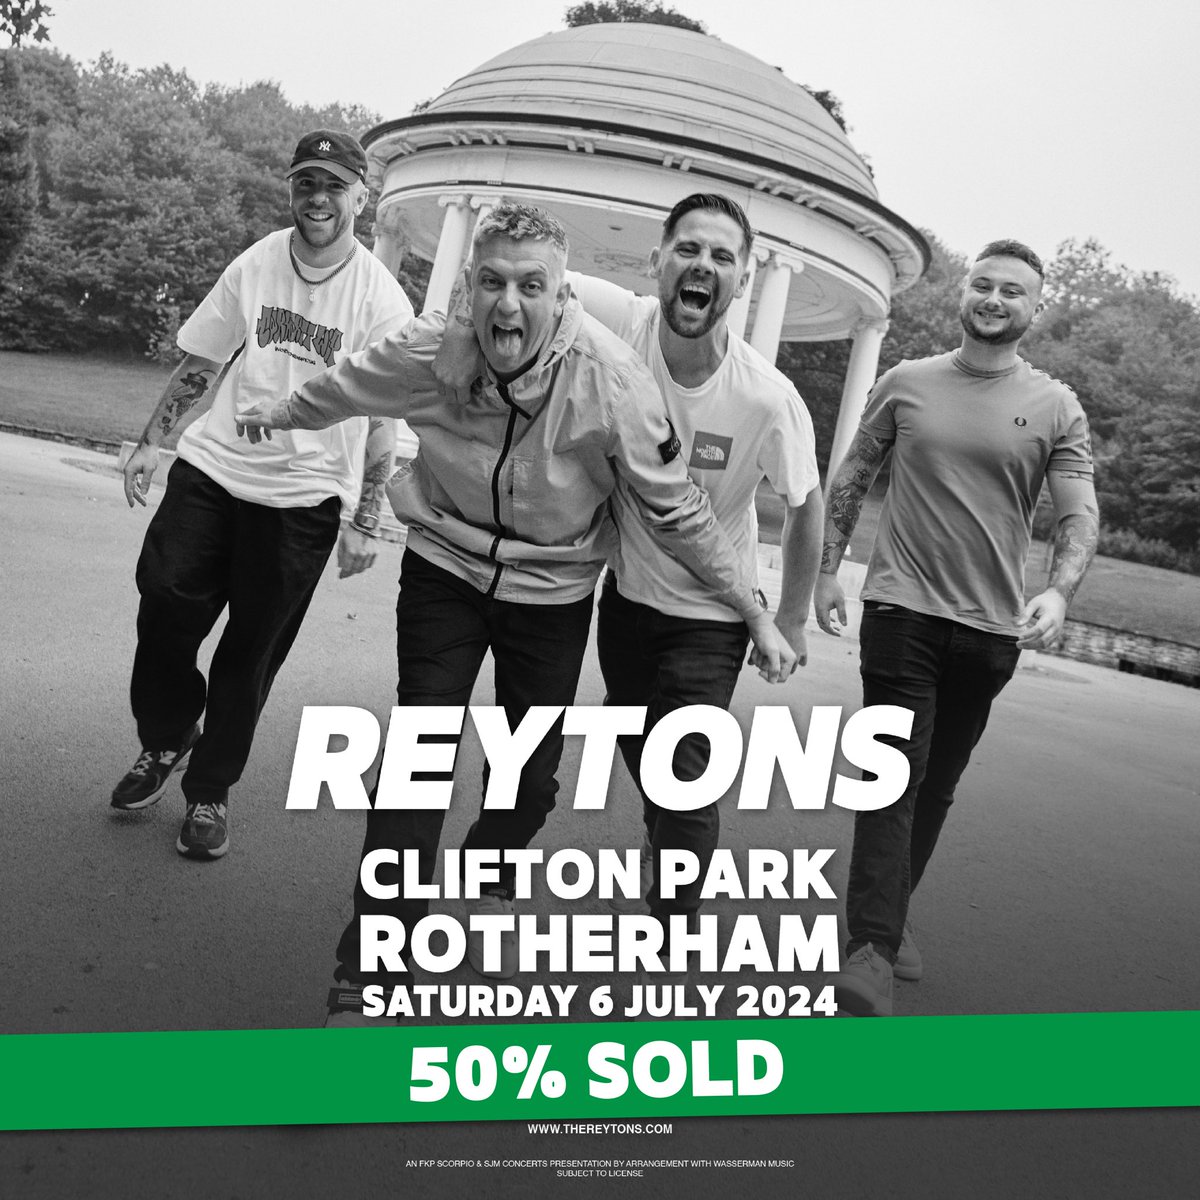 10,000 TICKETS SOLD!!! Over half of Clifton Park tickets have gone on the first day of general sale!!!! That's pretty much an arena... Bringing it home to Rotherham, what a feeling!! #AllReytons